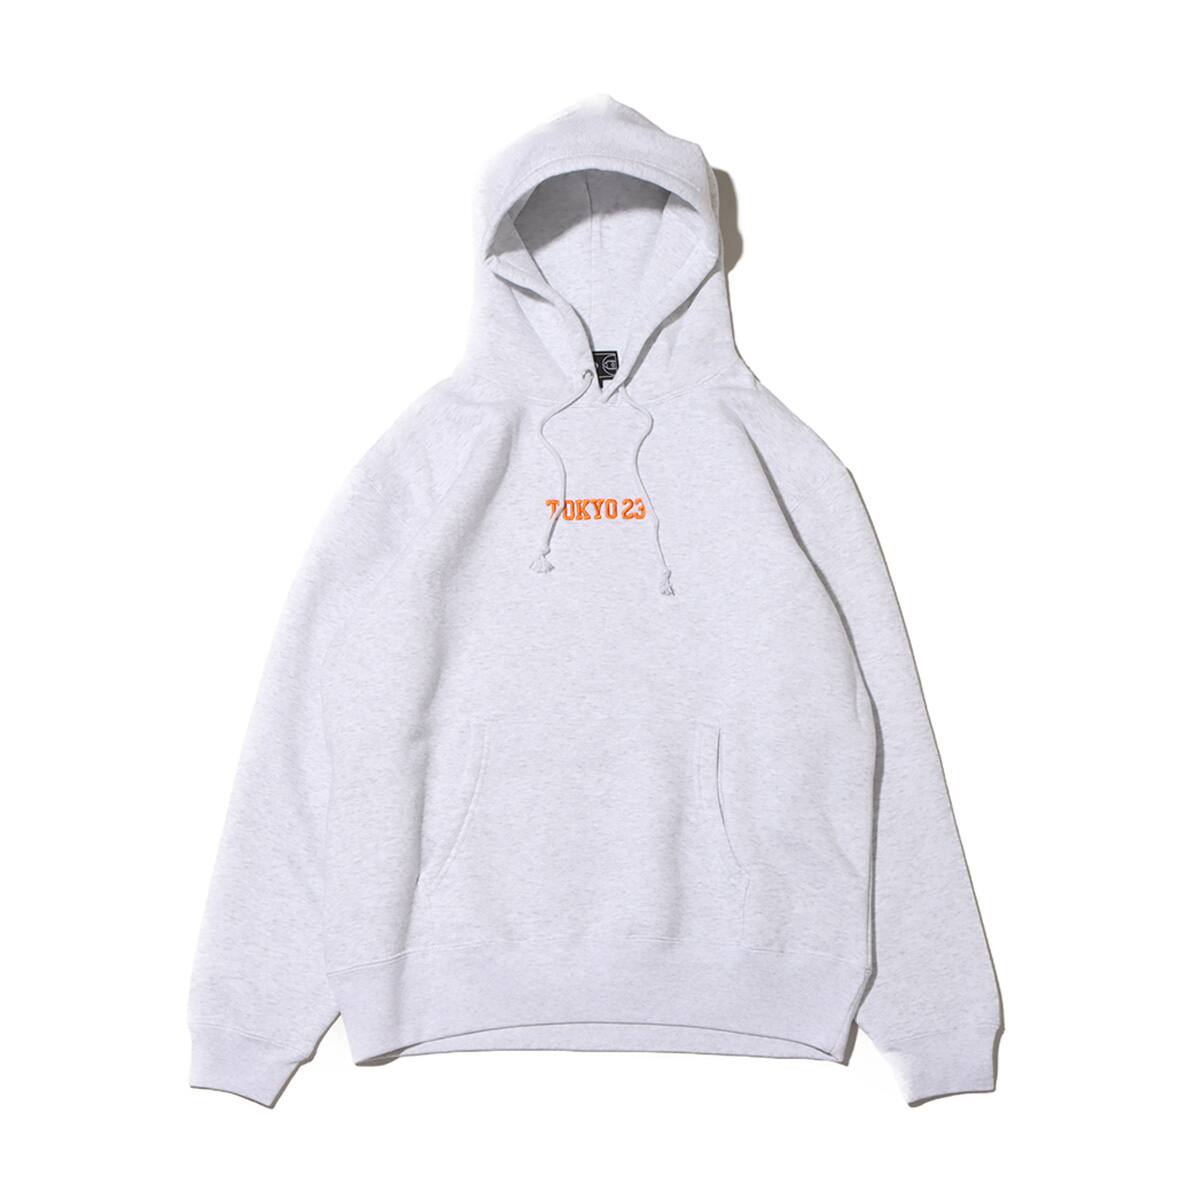 TOKYO 23 EMBROIDERY LOGO HOODIE ASH GRAY 23FW-I_photo_large